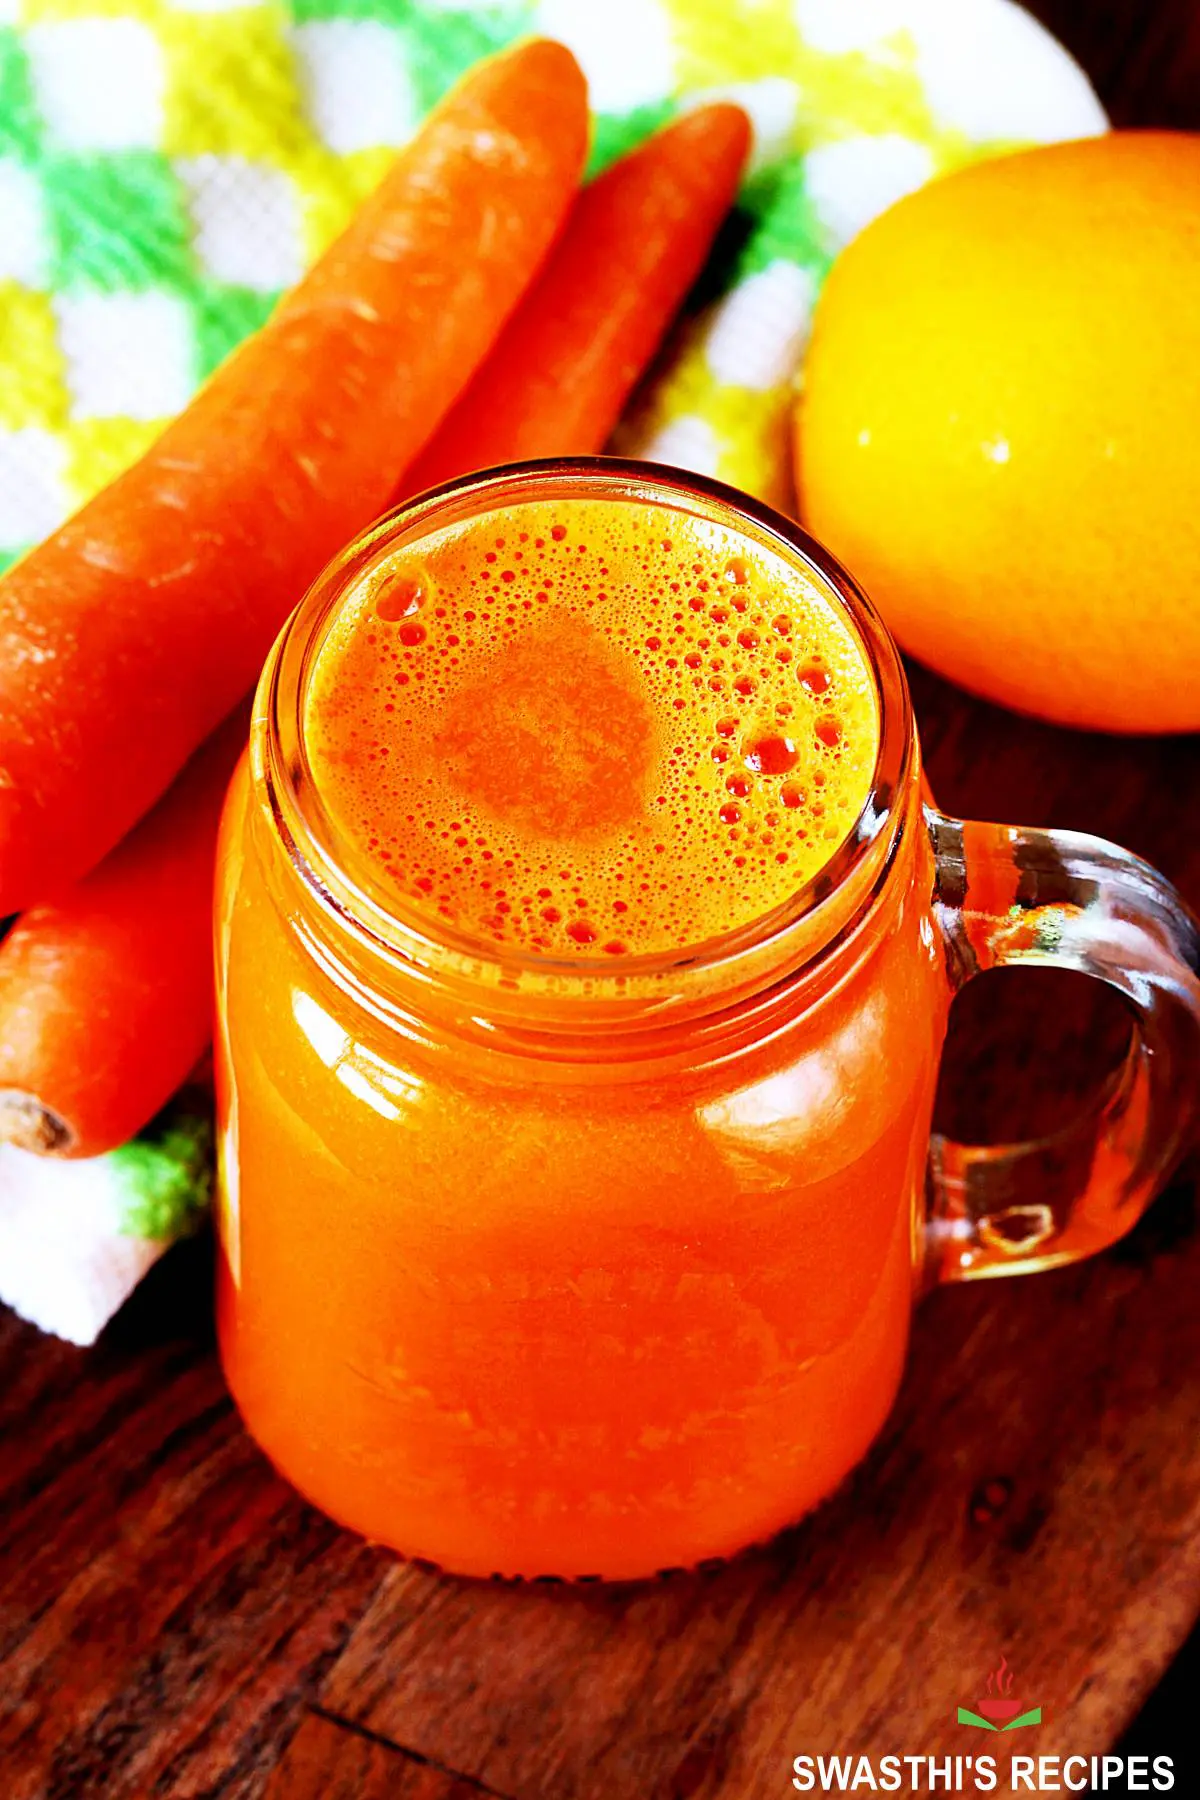 Carrot juice made with fresh carrots, oranges and ginger